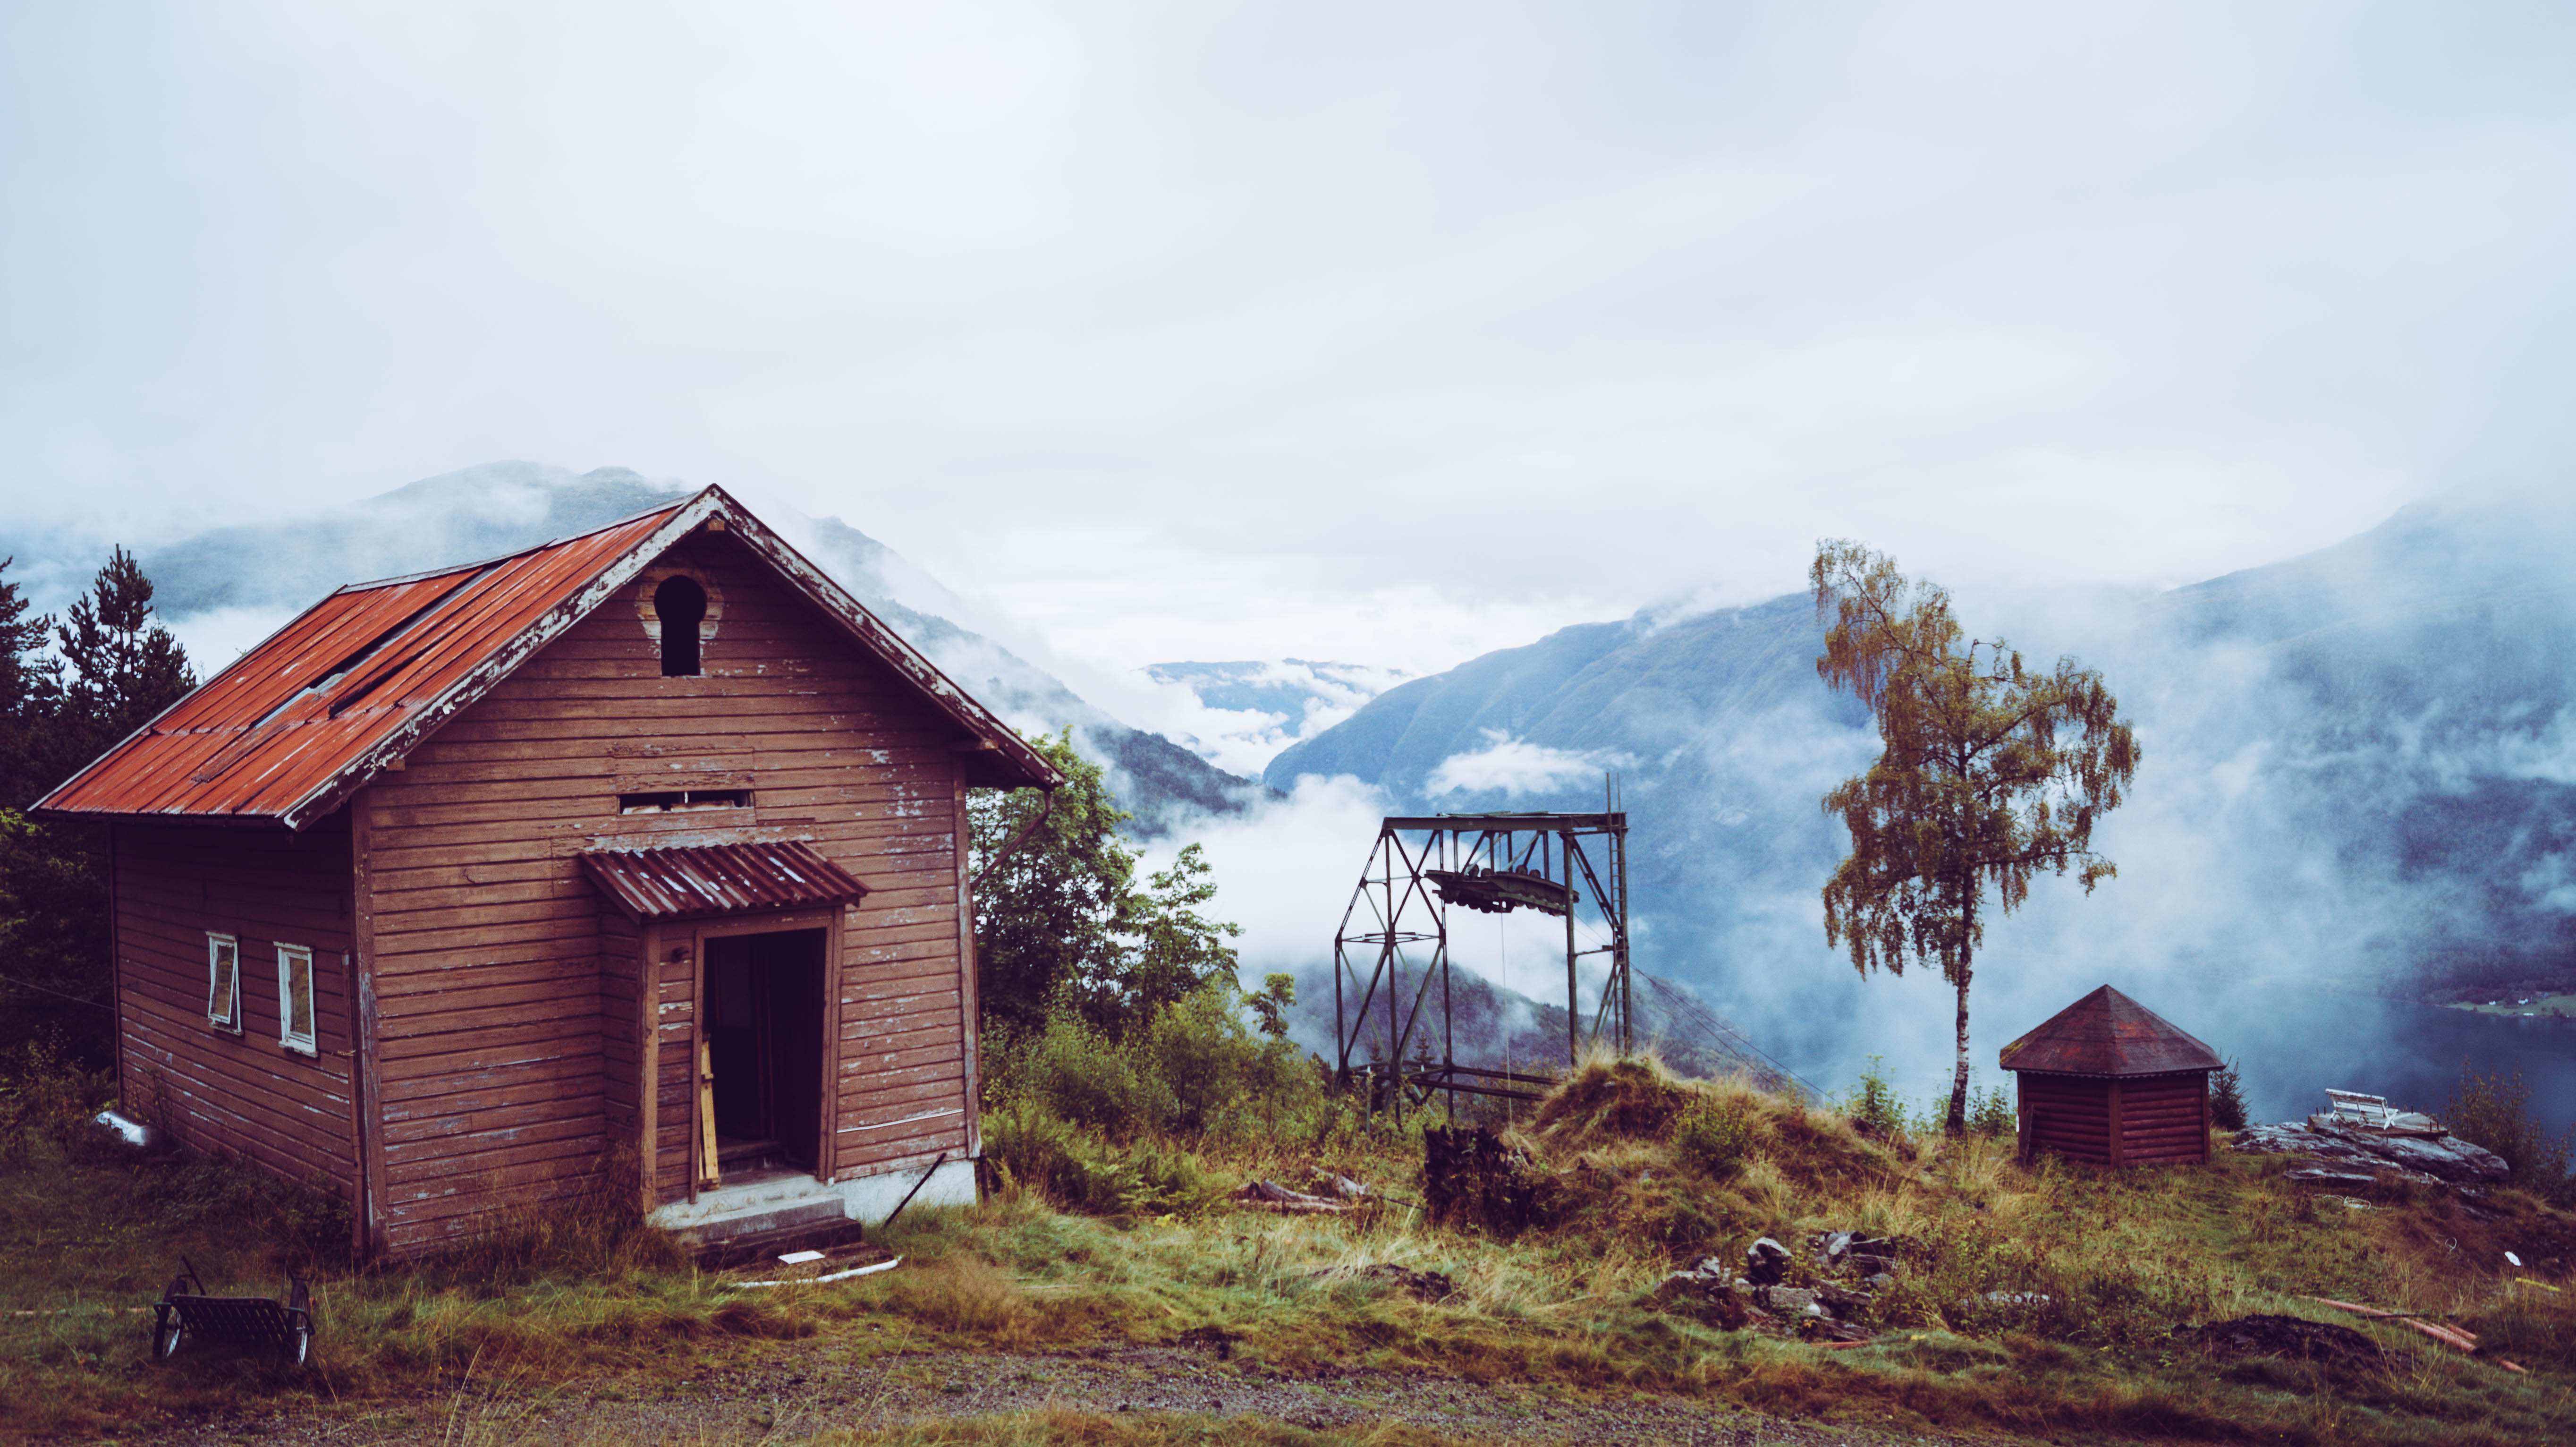 abandoned, House, Hut, Lift, Aerial tramway, Old, Landscape, Photography, Mist, Clouds, Cabin Wallpaper